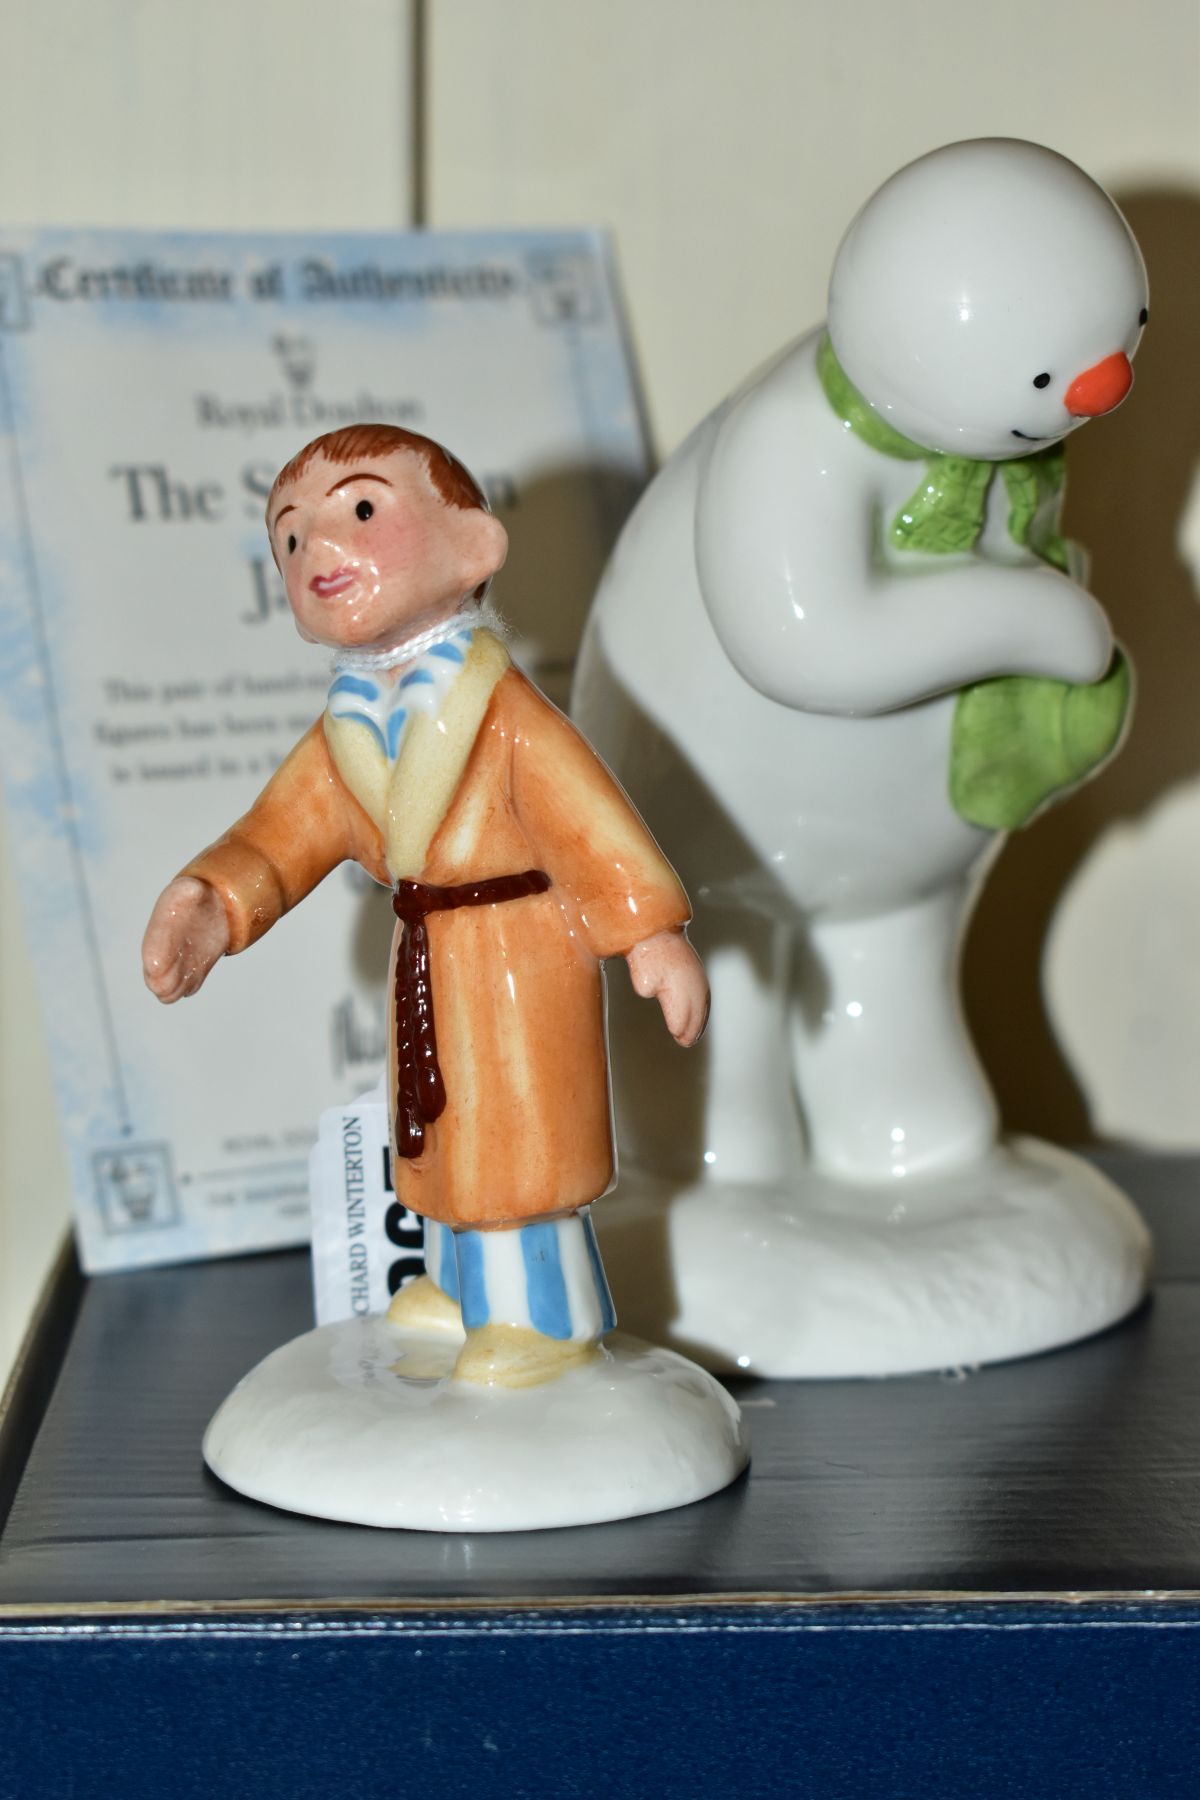 A LIMITED EDITION ROYAL DOULTON BOXED SET OF TWO FIGURES FROM THE SNOWMAN SERIES, The Snowman and - Image 2 of 4